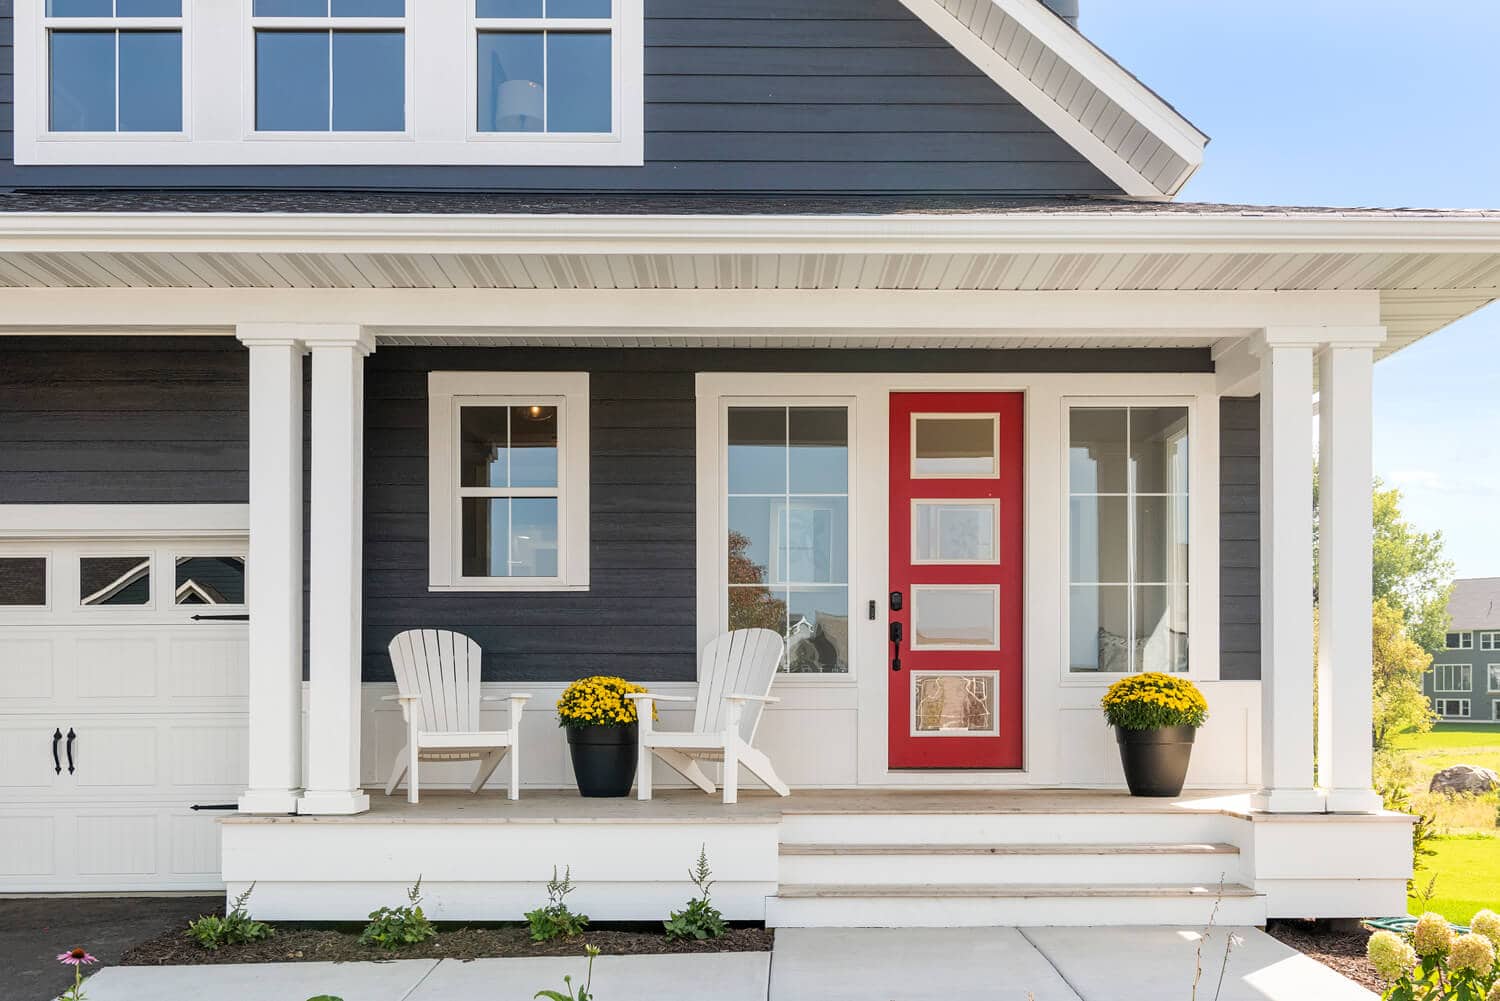 Blue painted home with red front door